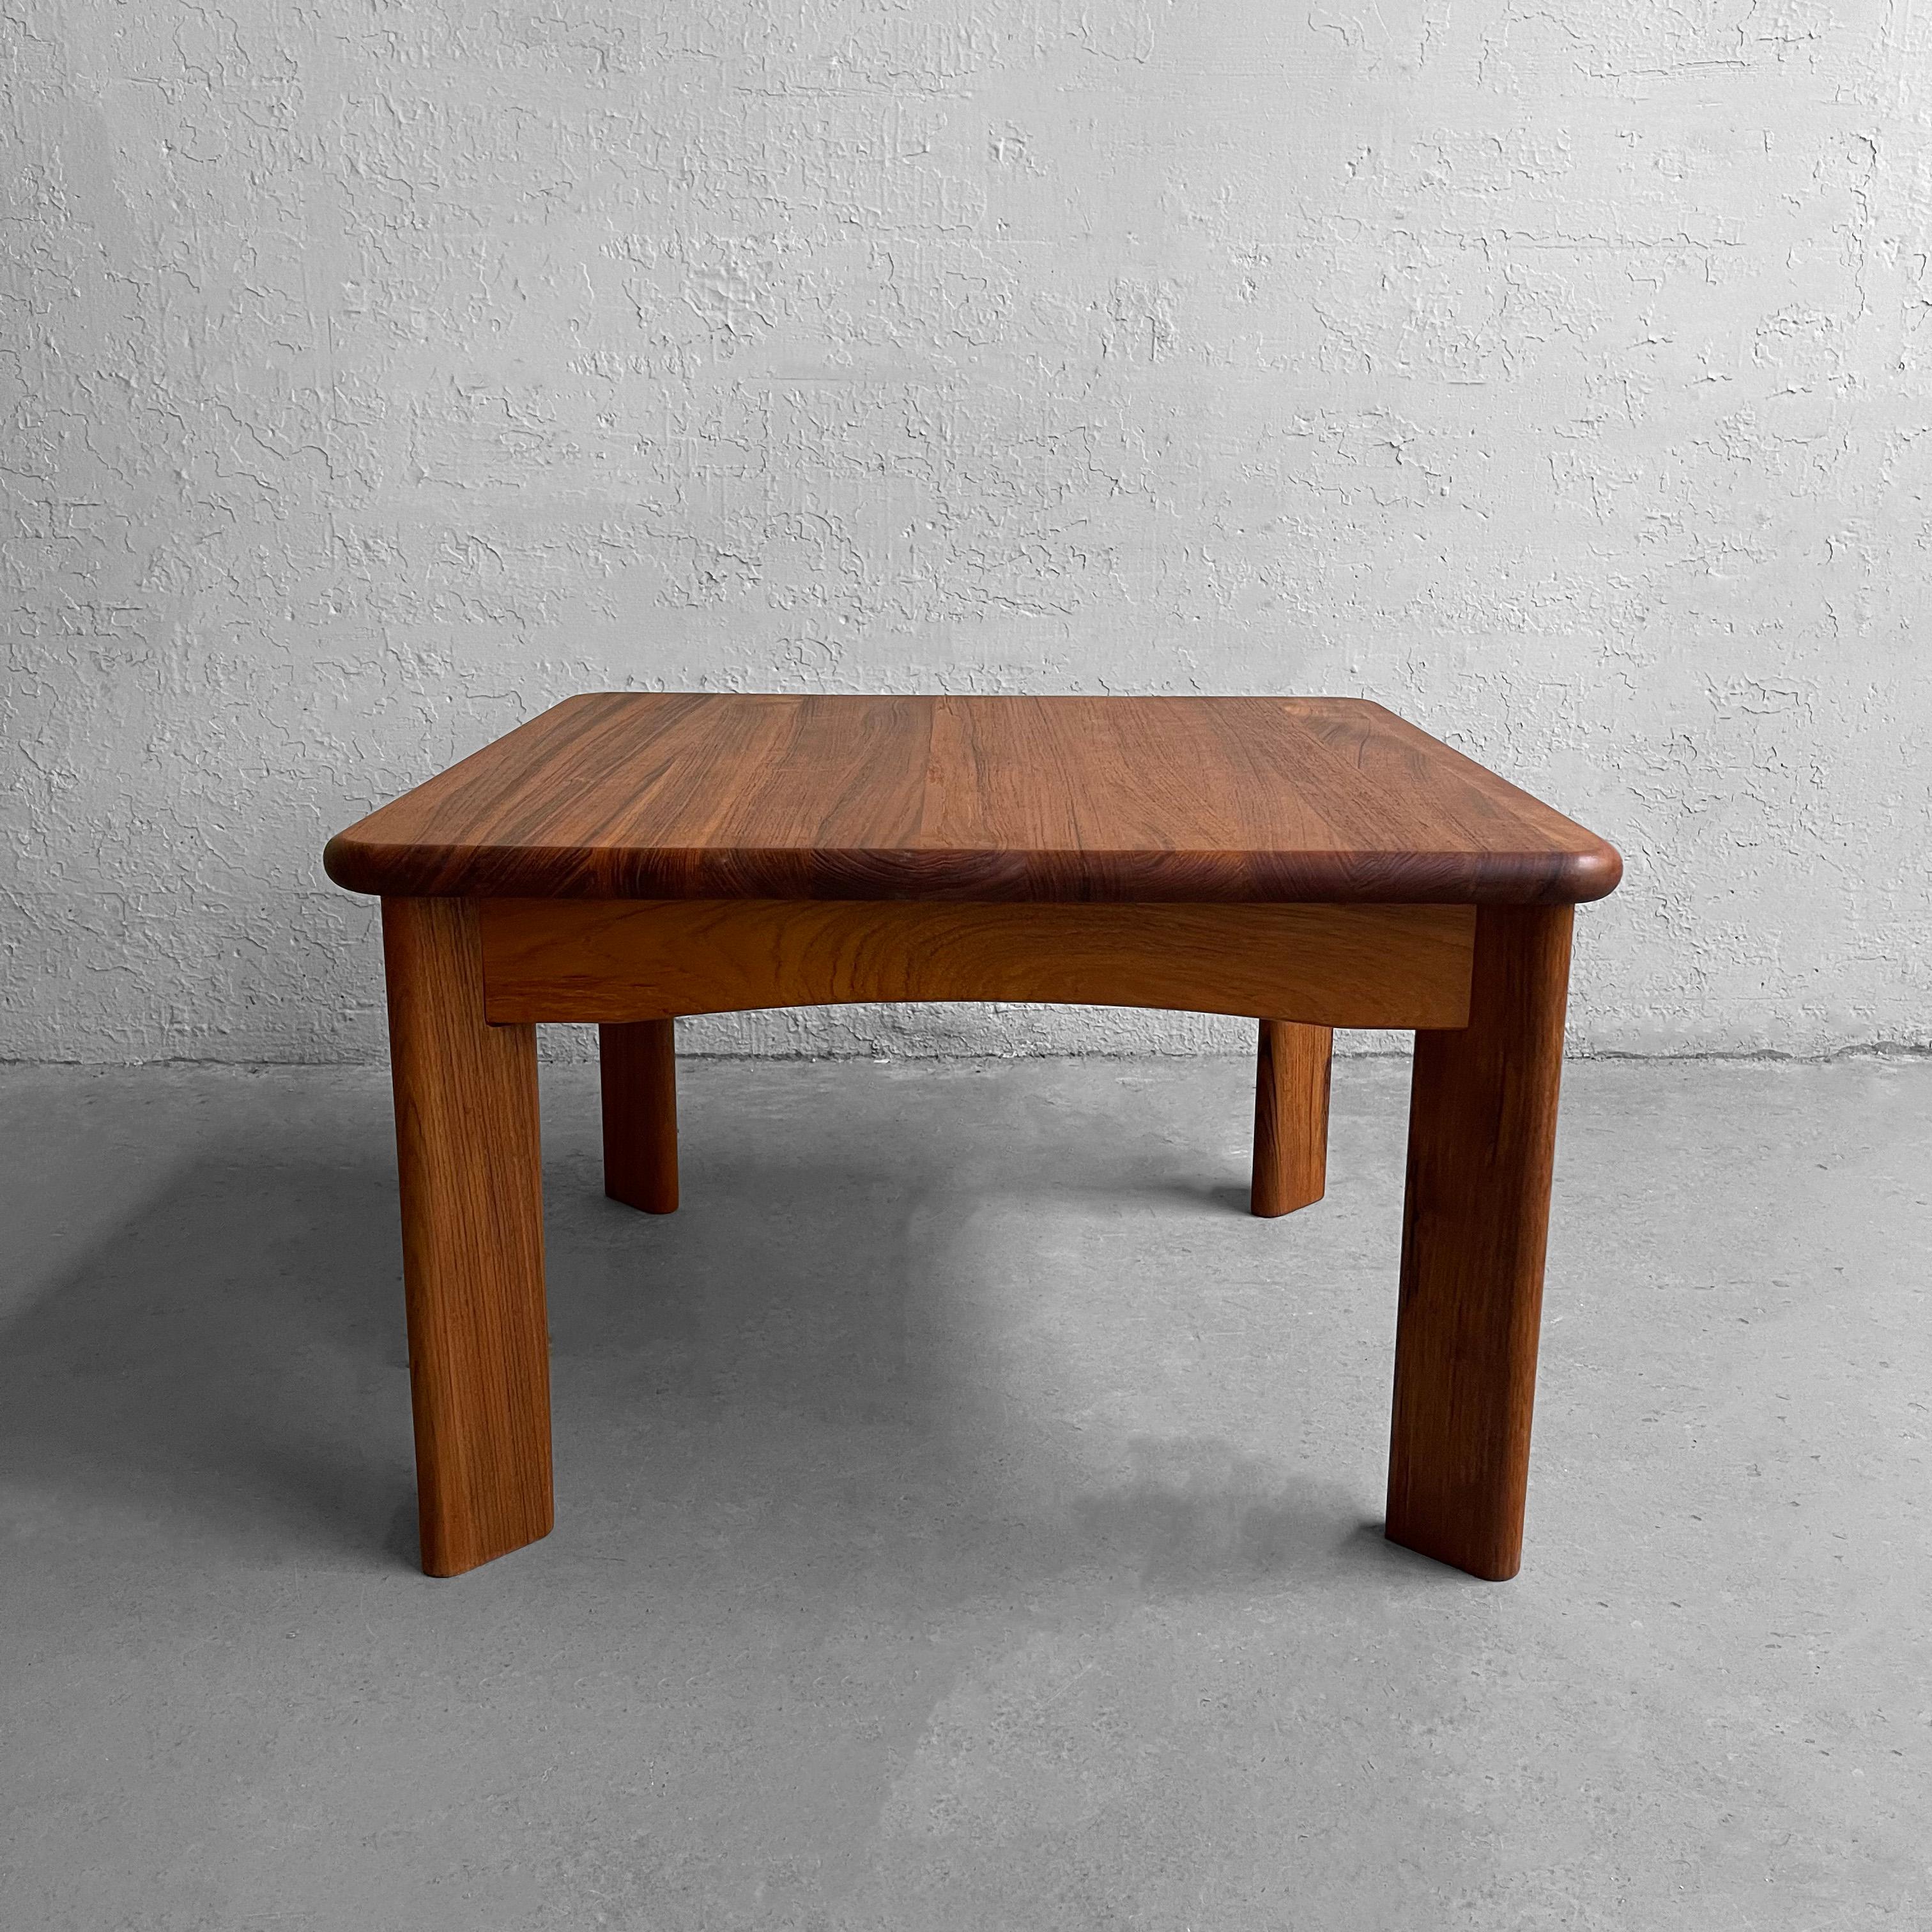 Scandinavian modern, solid teak, square, side or coffee table attributed to Göte Möbler Nässjö, Sweden features angular legs, rounded edge top and contoured lip. This table can be used as a side or coffee table.